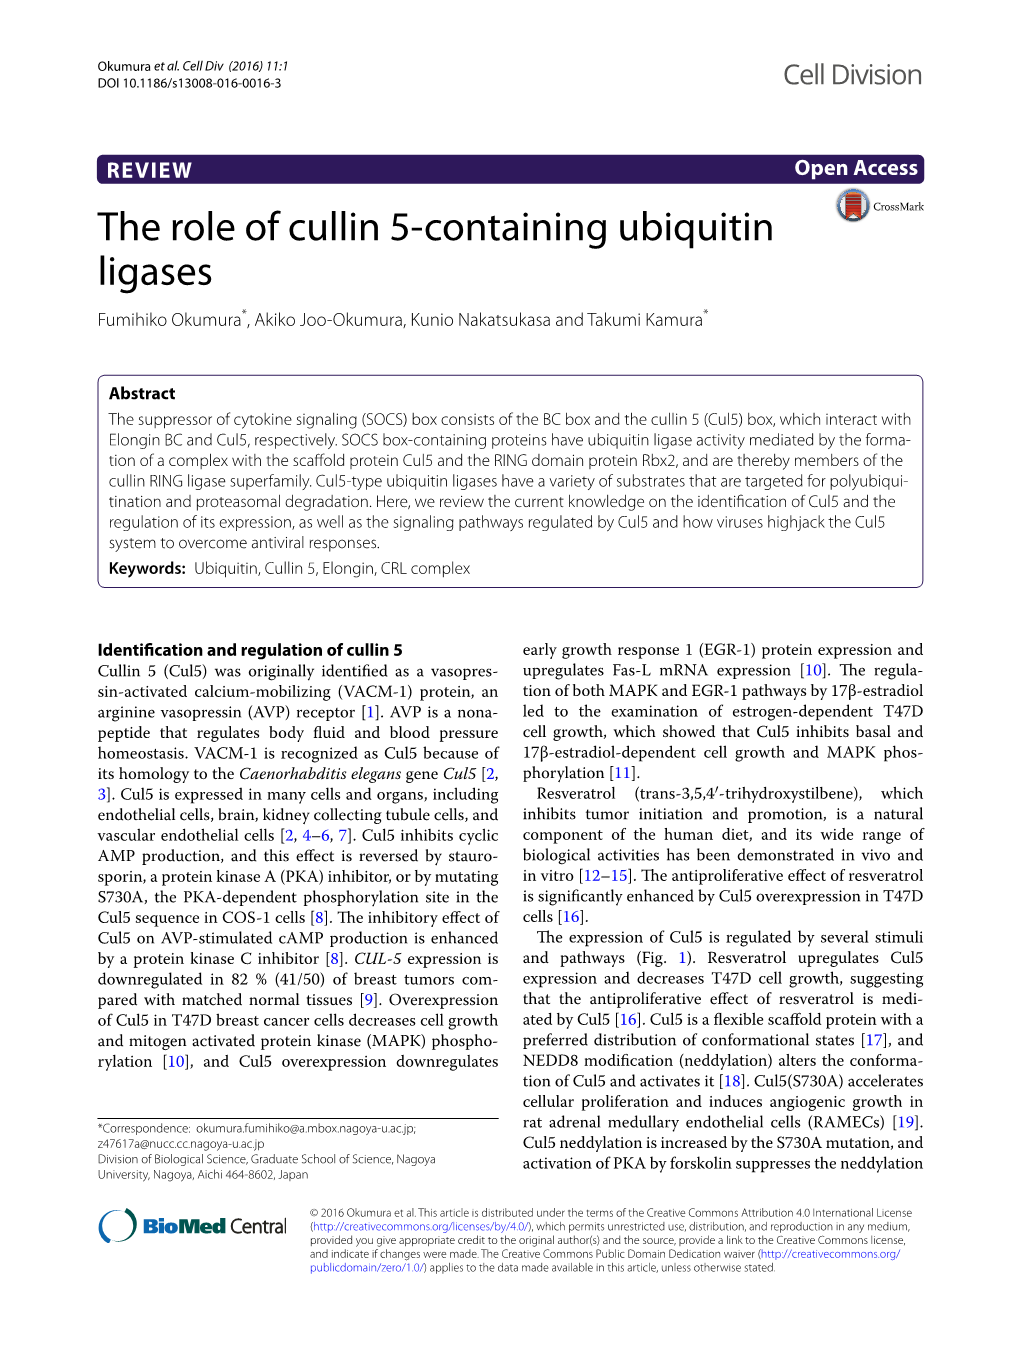 The Role of Cullin 5-Containing Ubiquitin Ligases